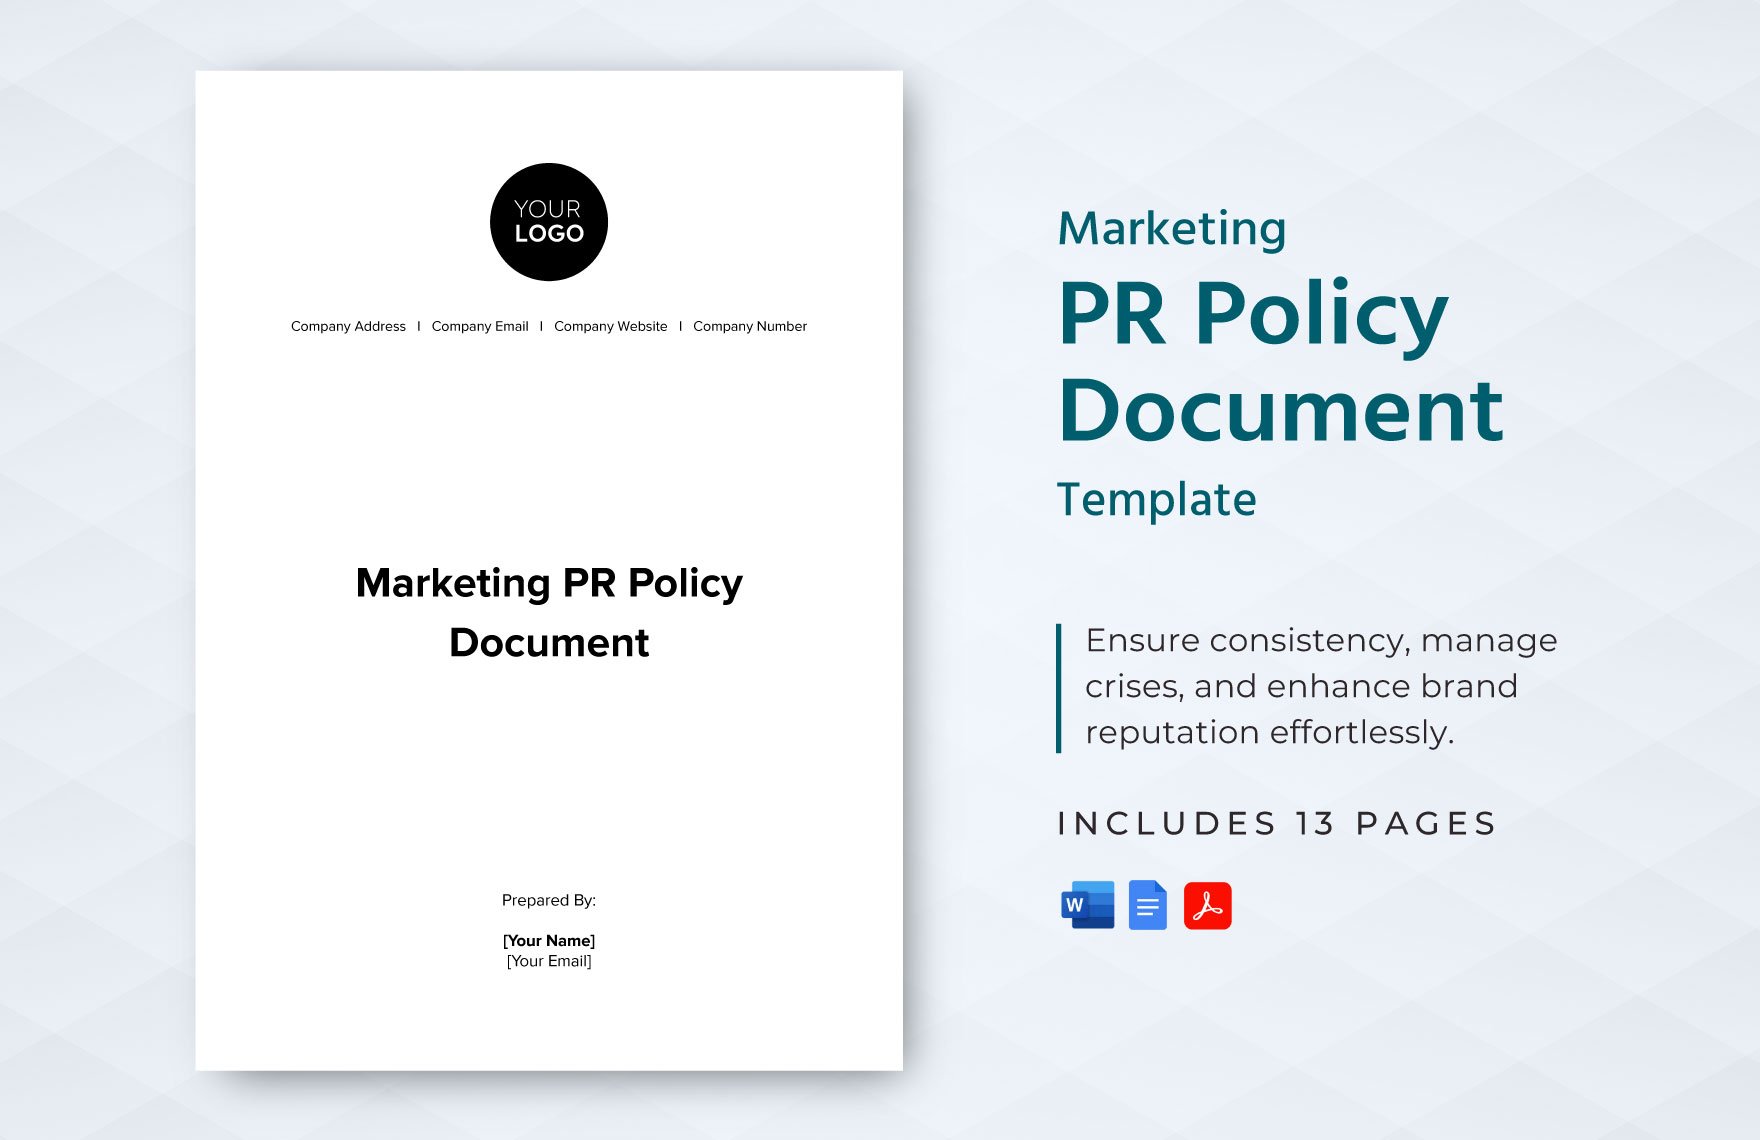 Marketing PR Policy Document Template